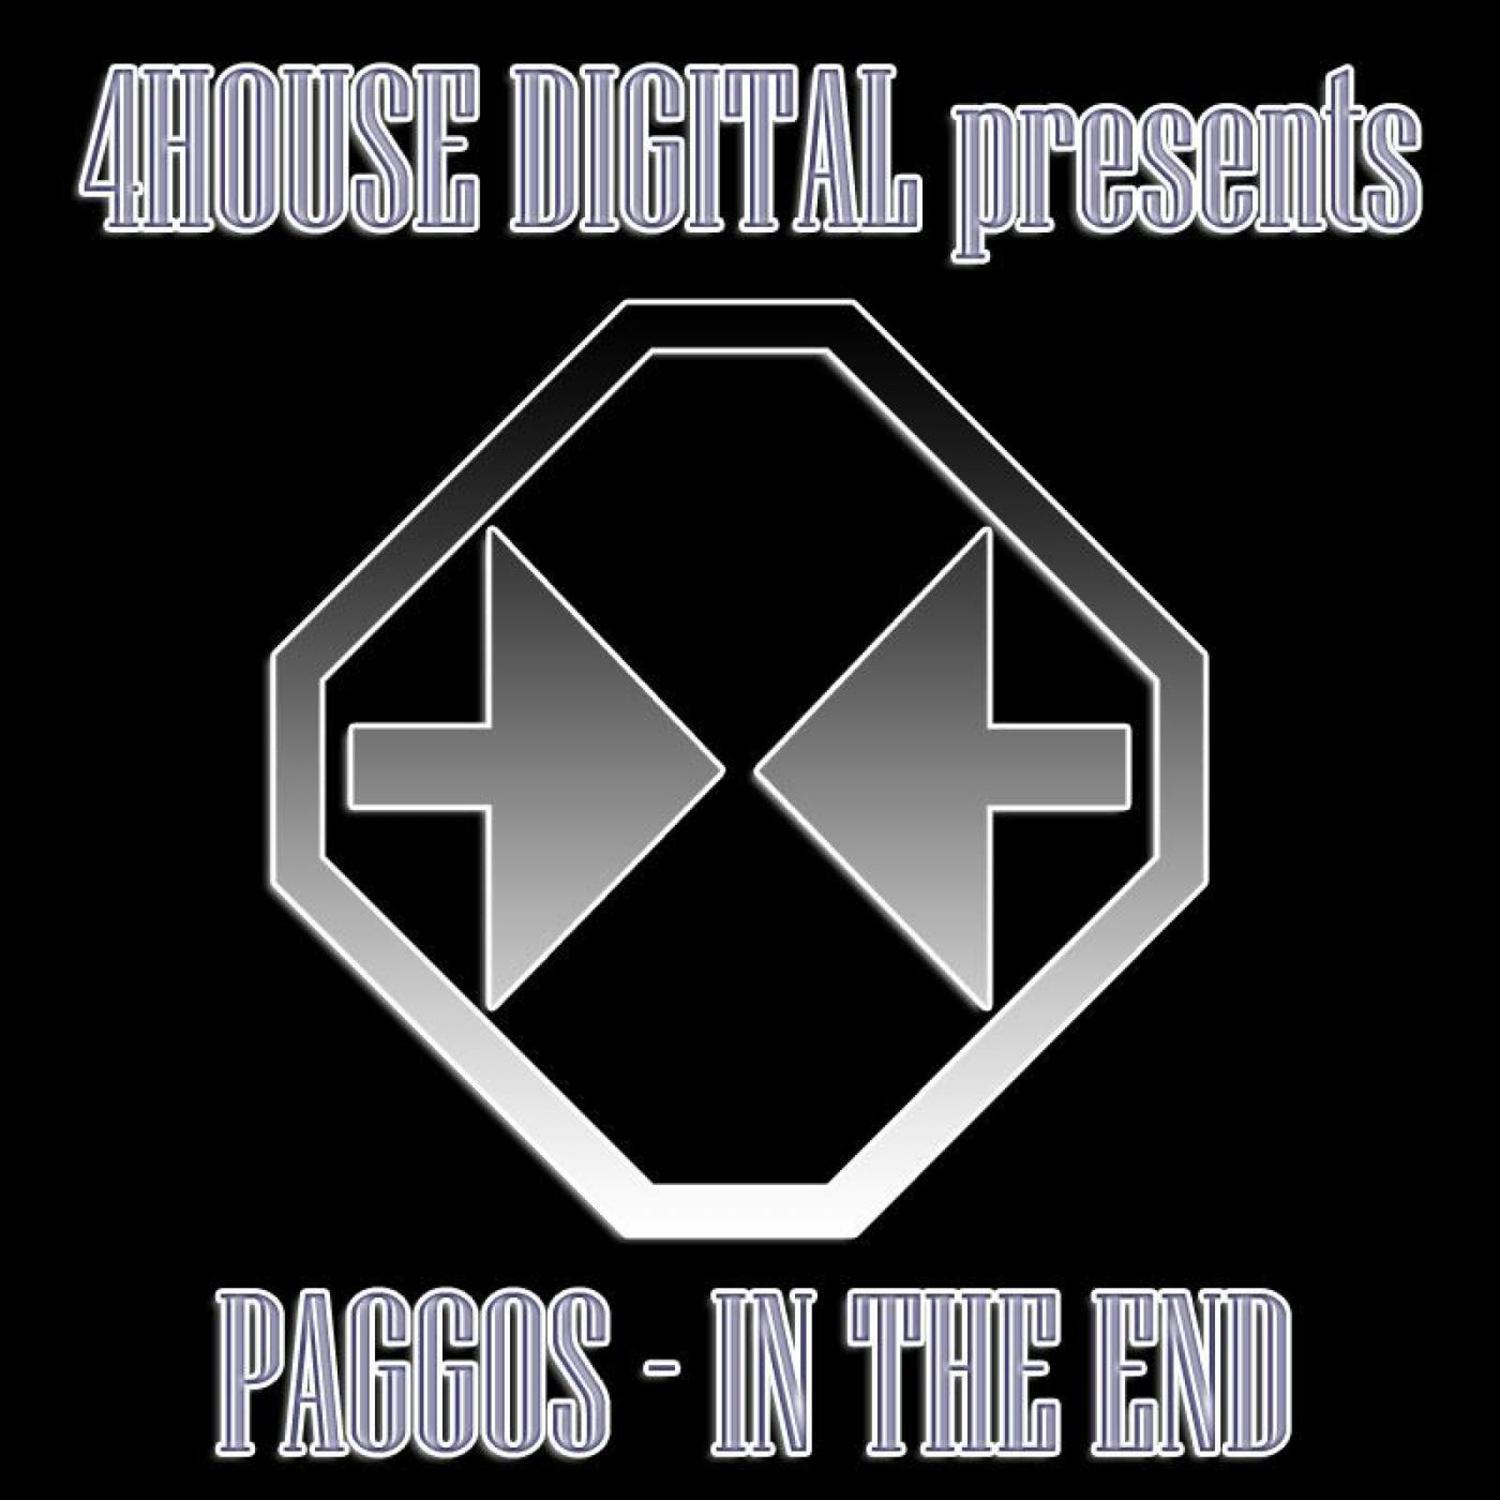 Paggos - In The End (Original Mix)